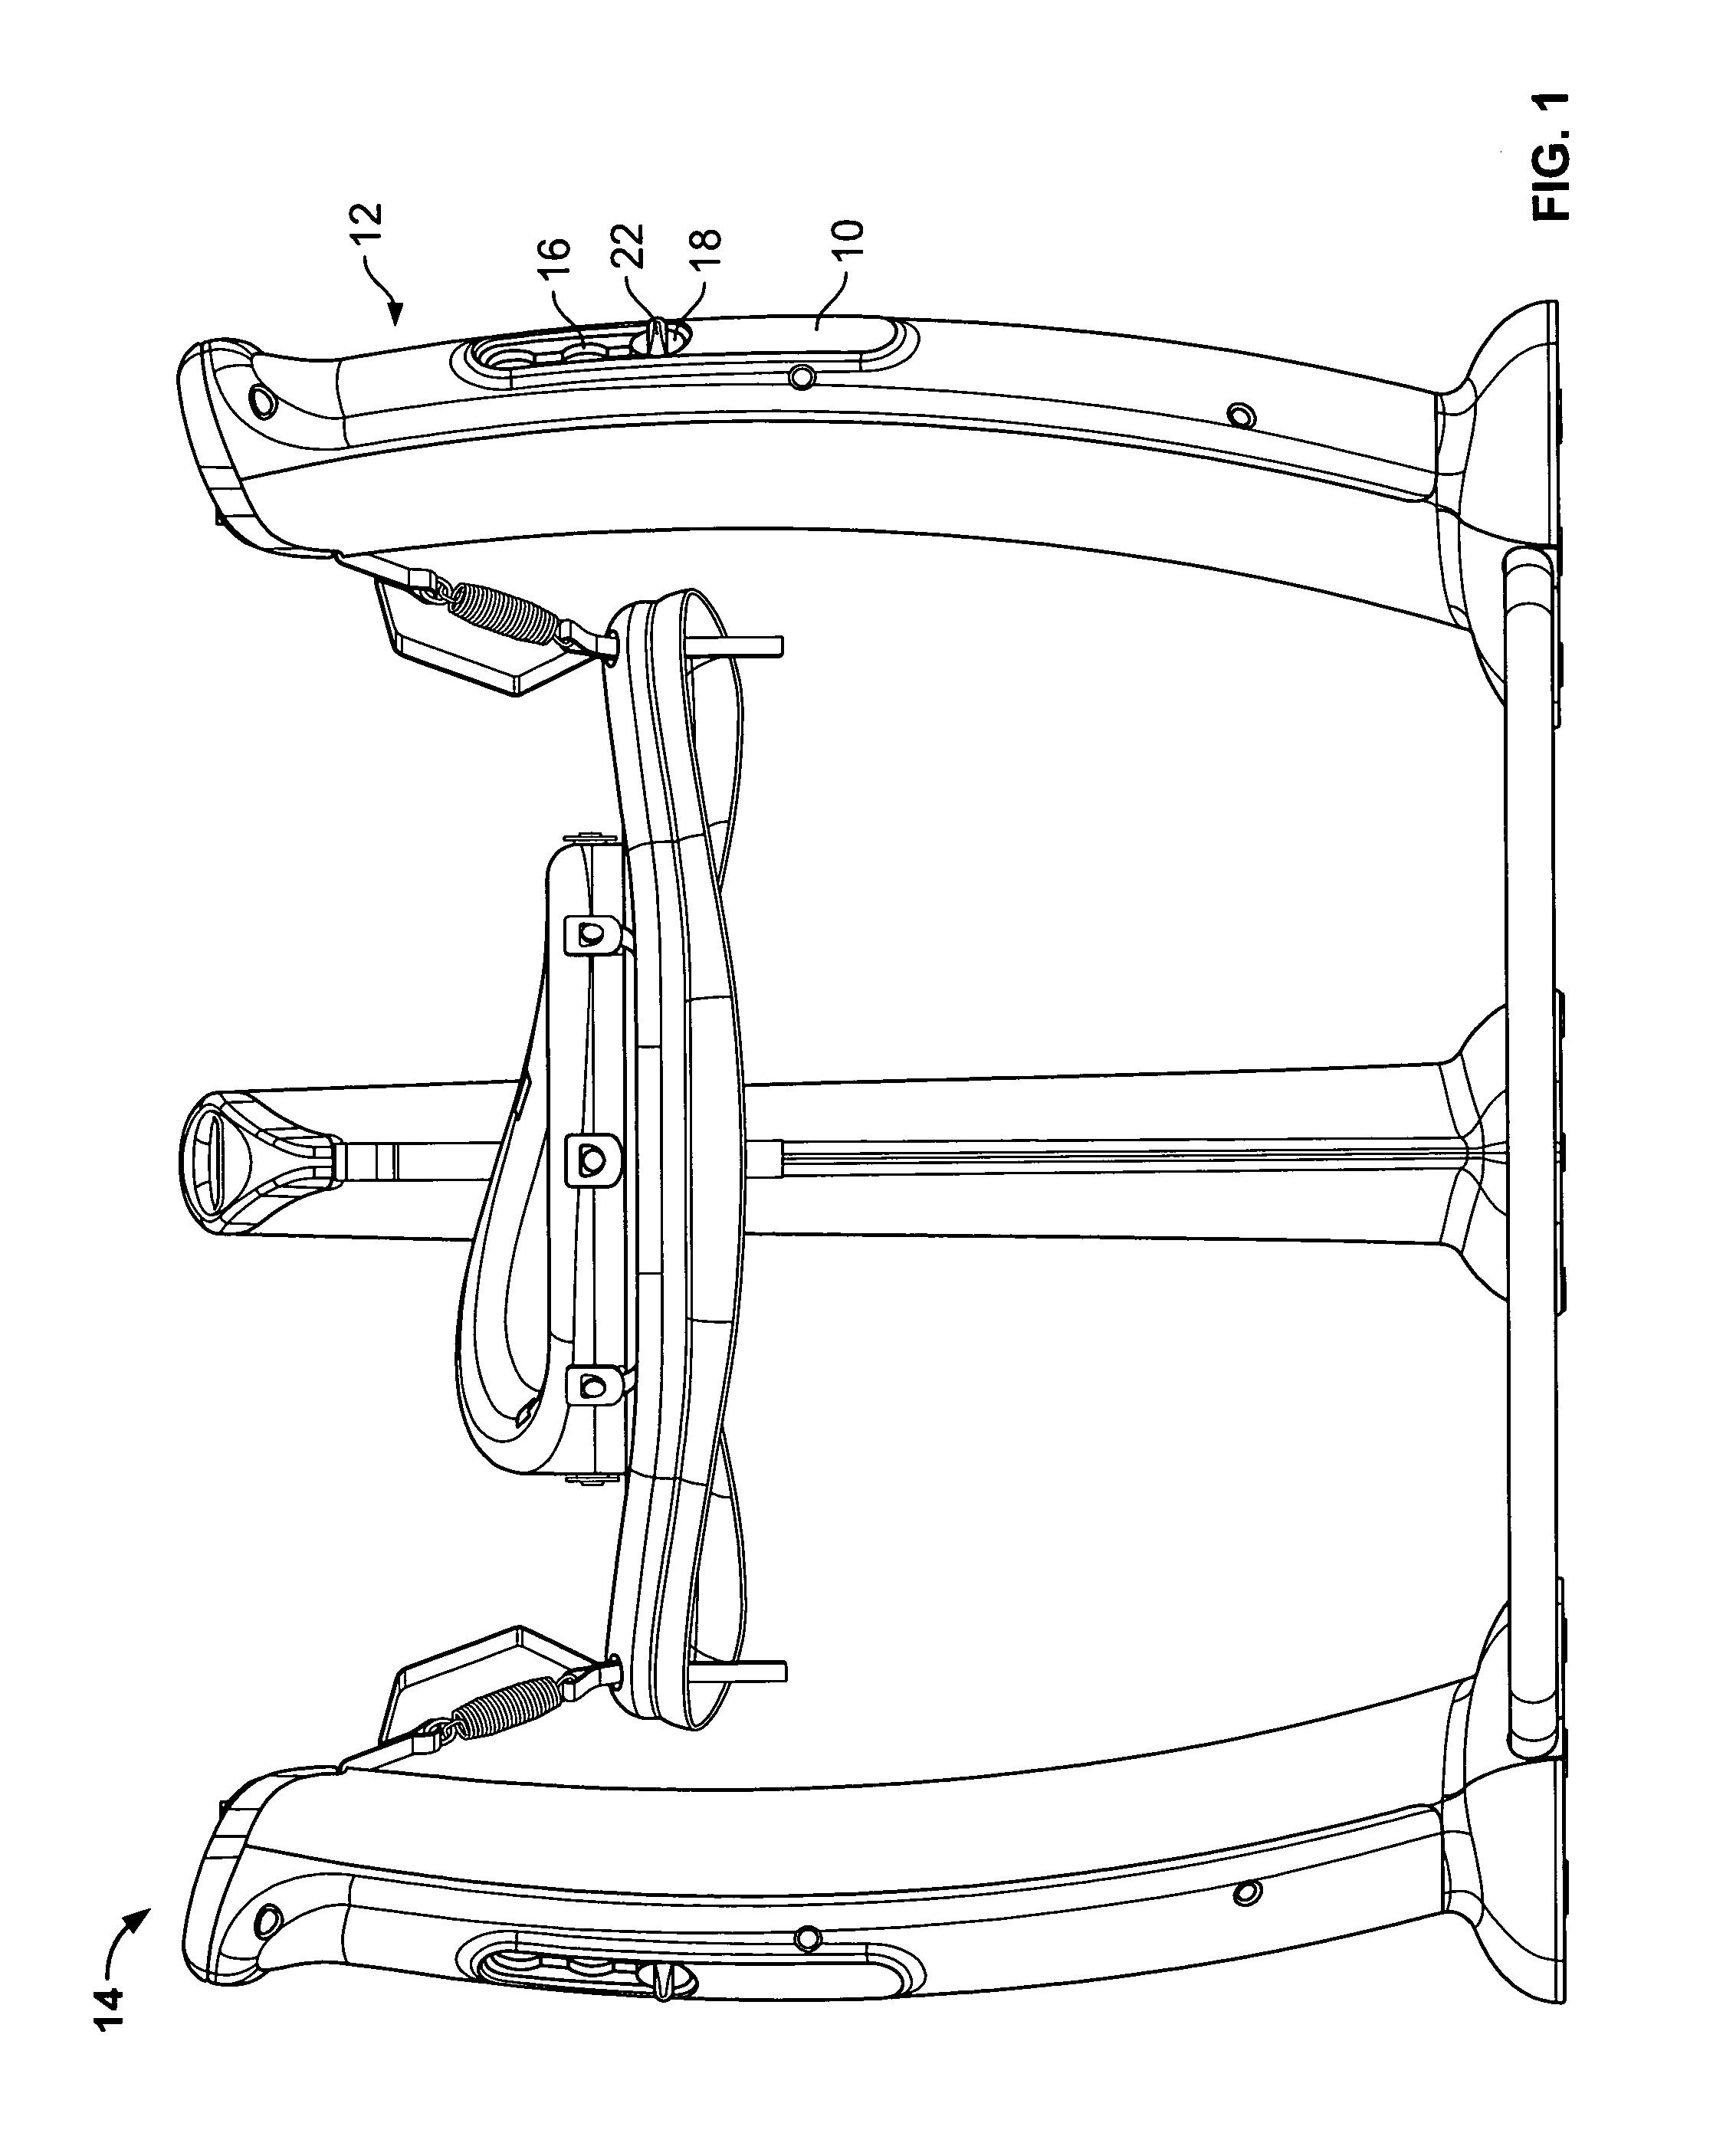 Height adjustment mechanism for juvenile product